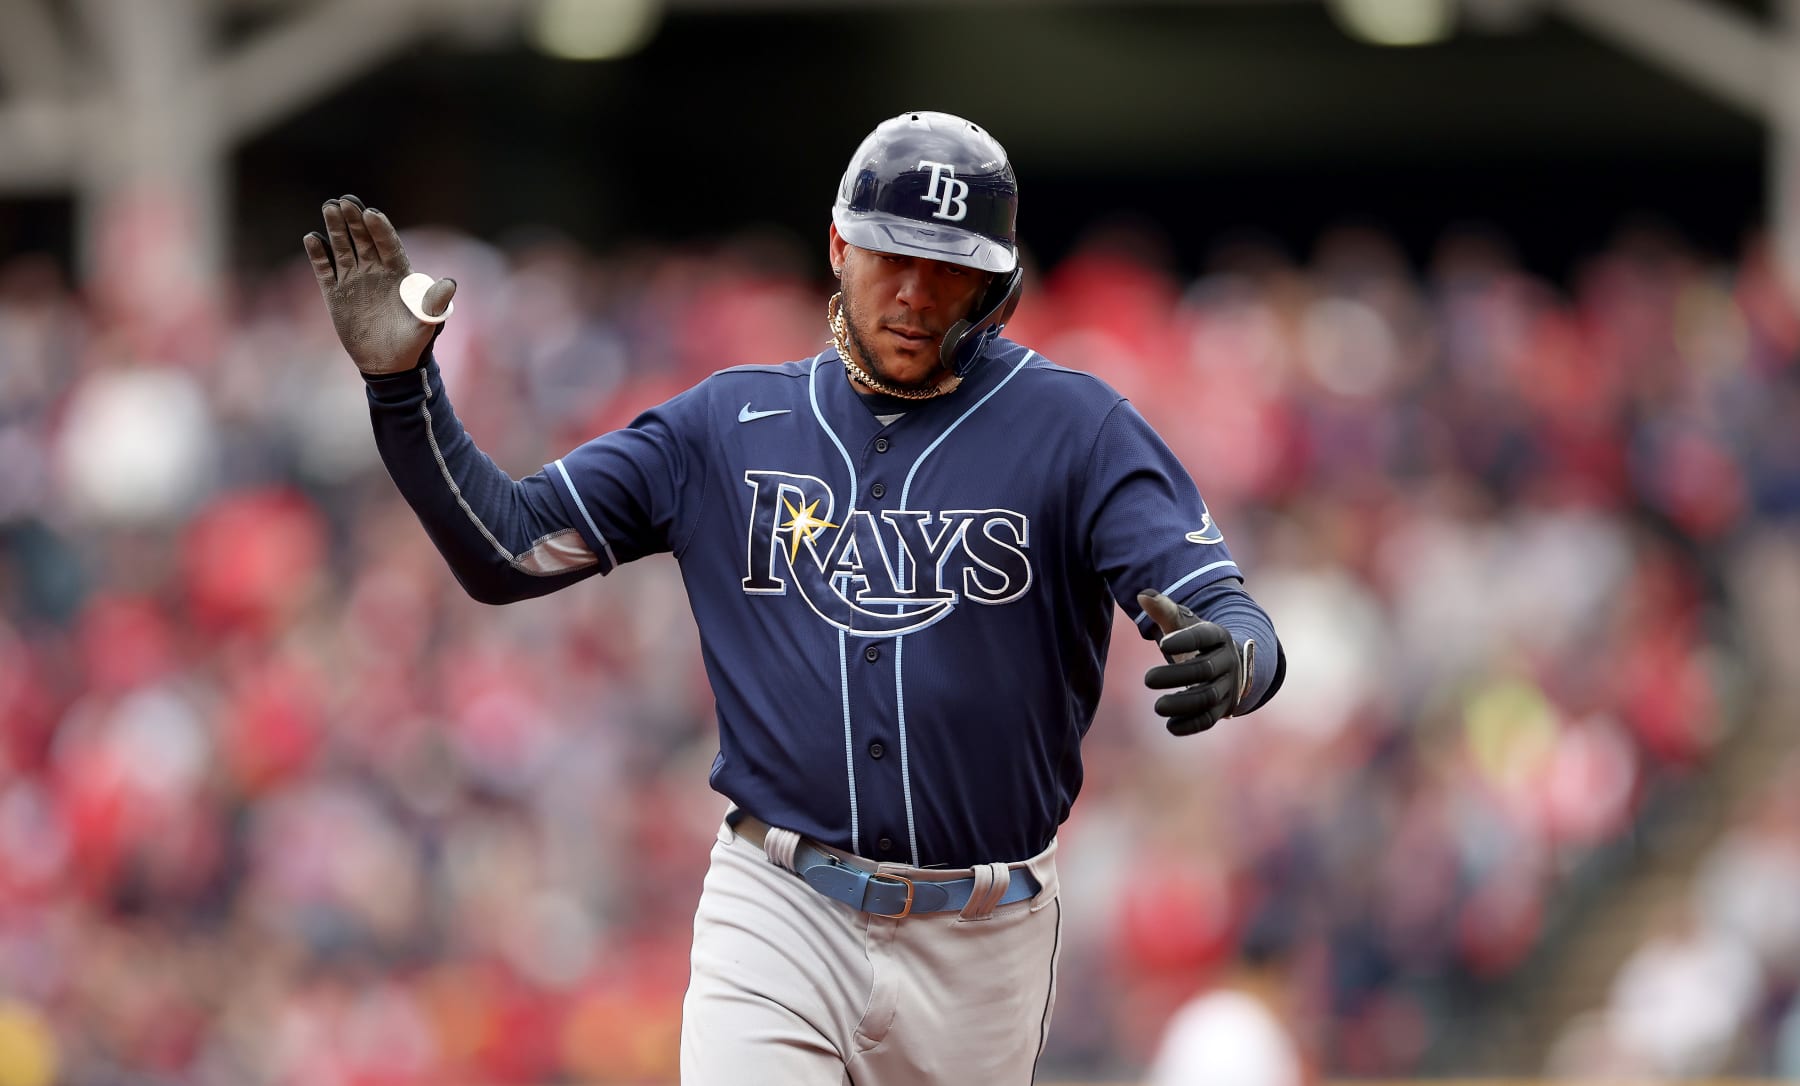 Tampa Bay Rays had interest in Reds' Tommy Pham before Peralta trade